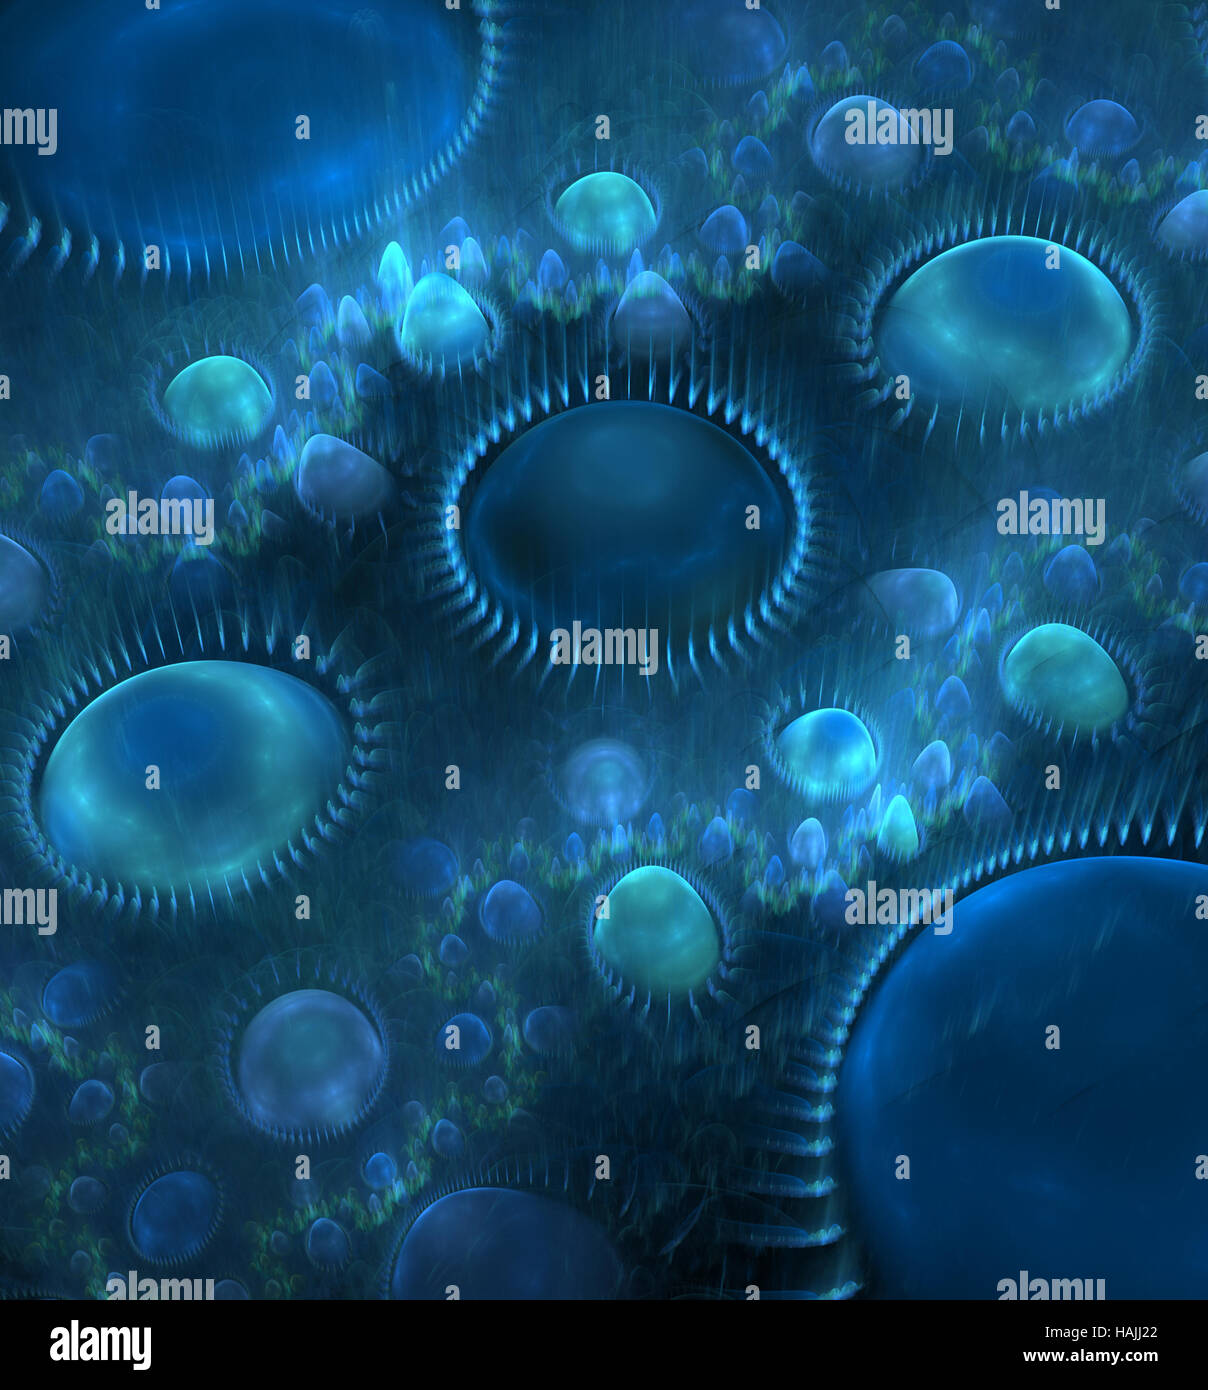 Abstract fractal blue shape computer generated image Stock Photo